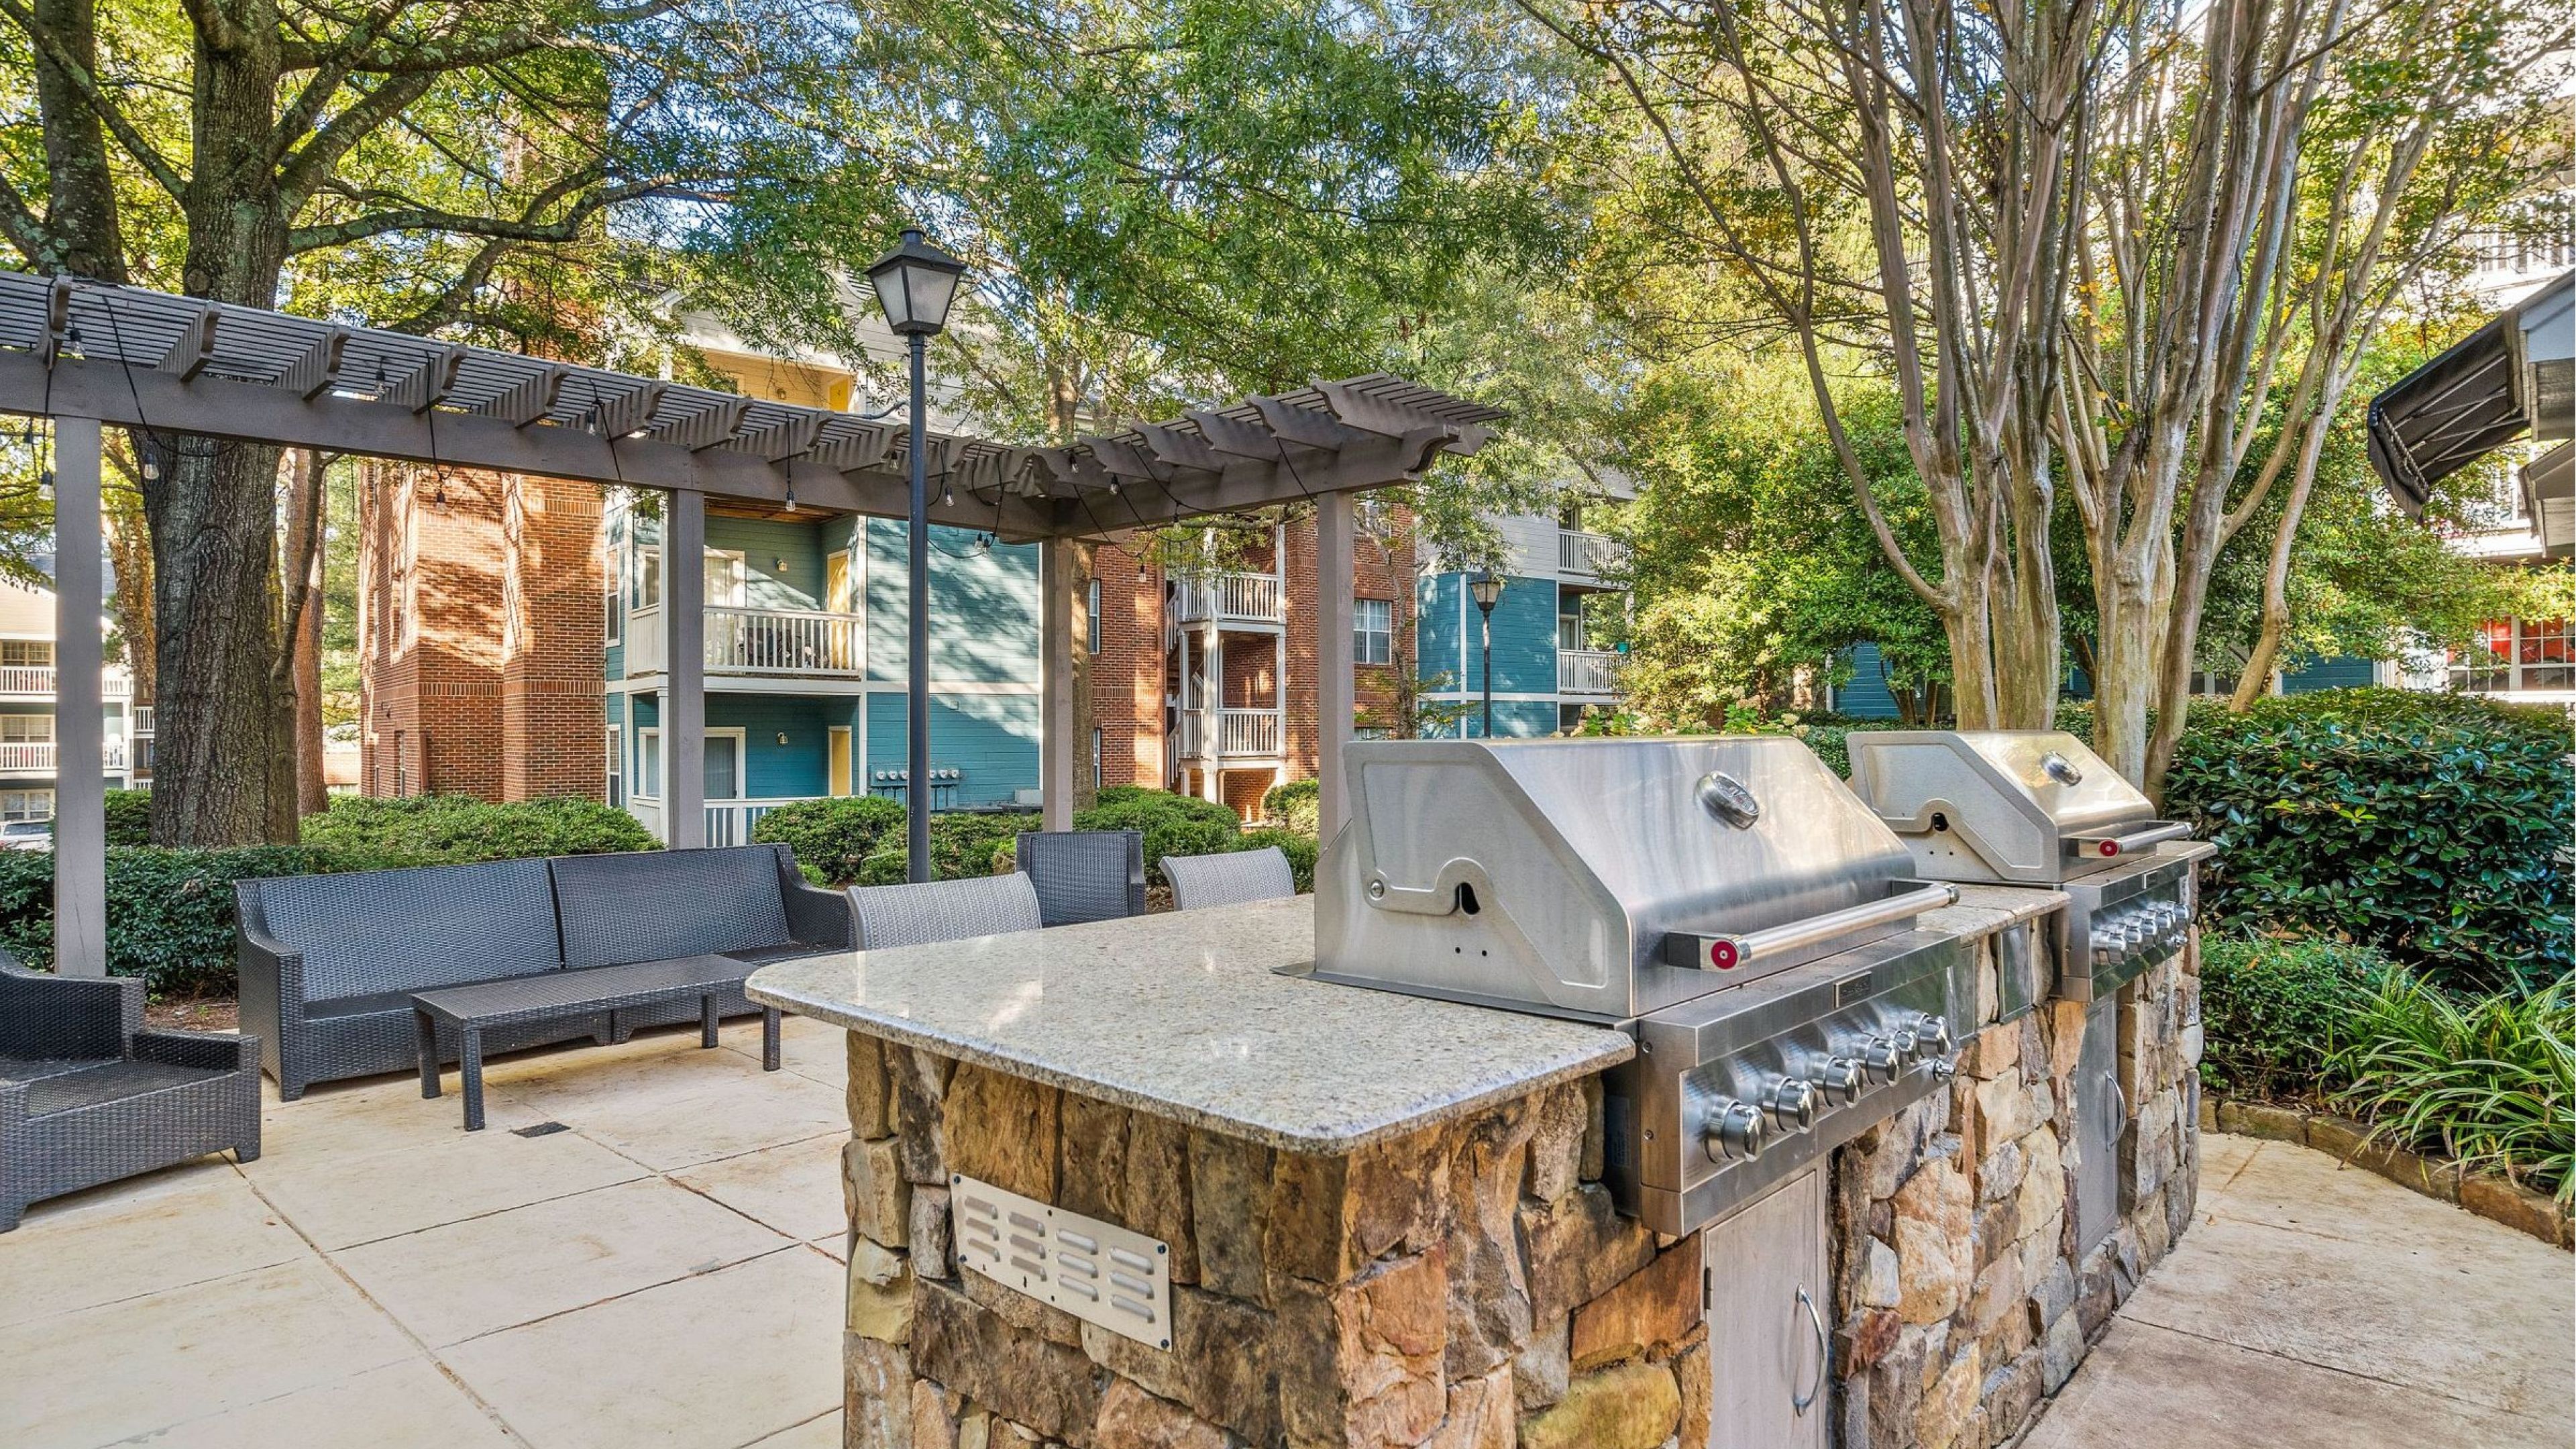 Hawthorne at the Park outdoor grilling area resident amenity with seating and beautiful stonework.